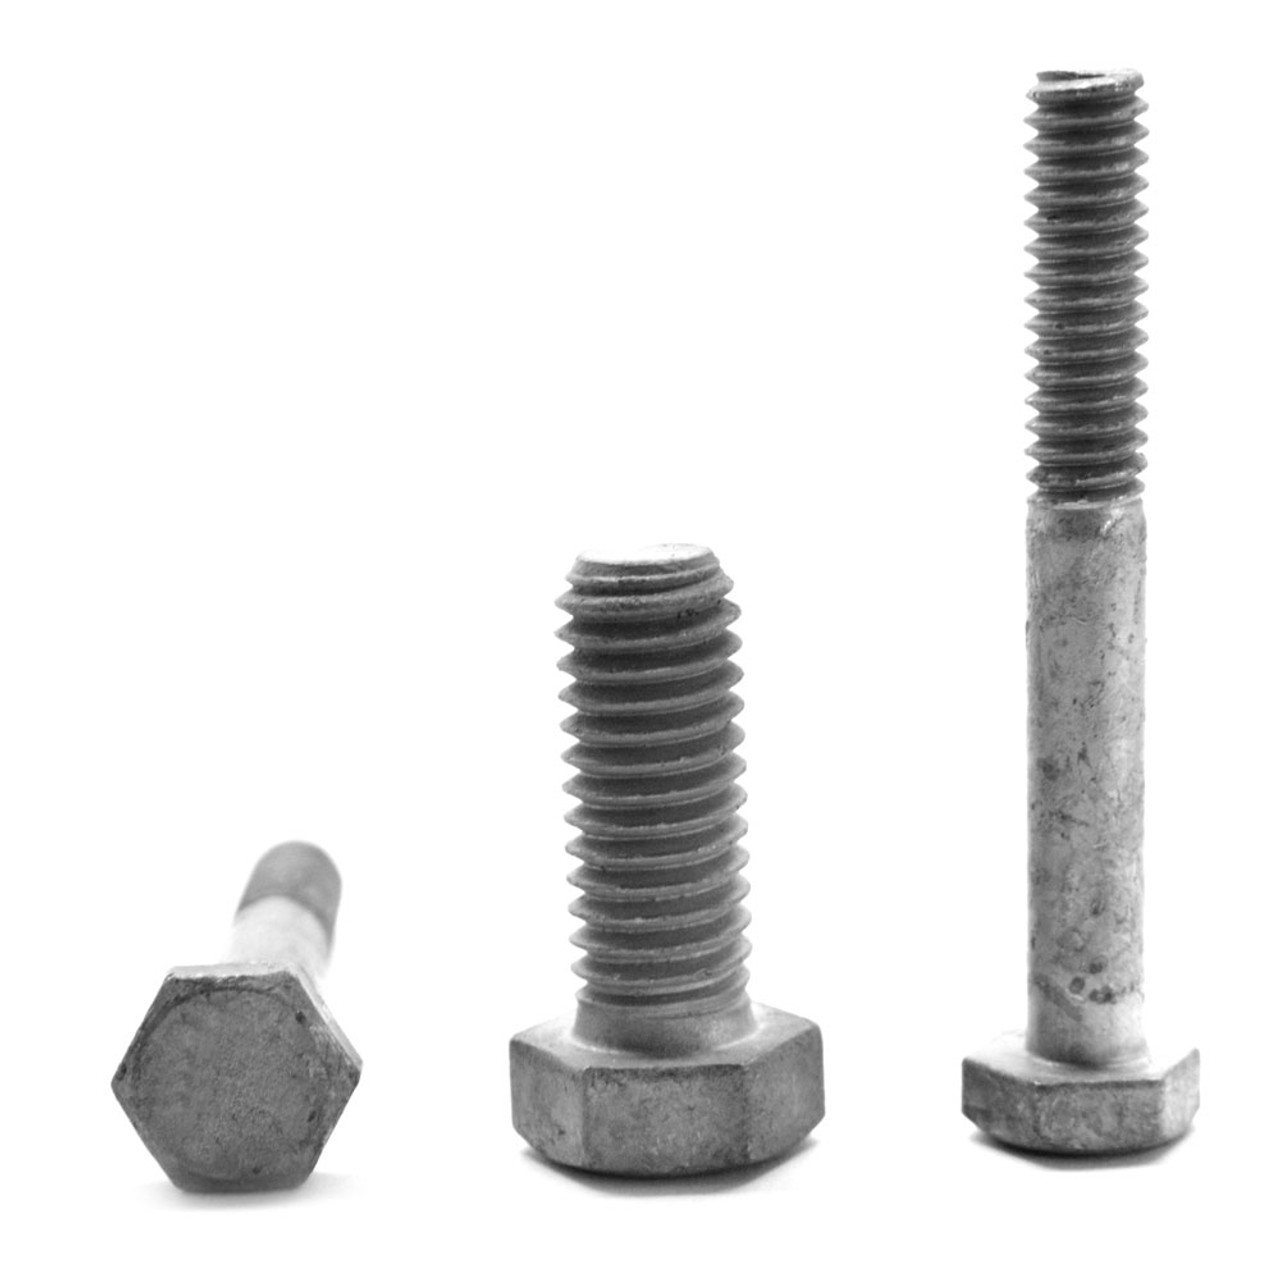 5/8"-11 x 8"6"THD UNDER-SIZED Coarse Thread A307 Grade A Hex Bolt Low Carbon Steel Hot Dip Galvanized